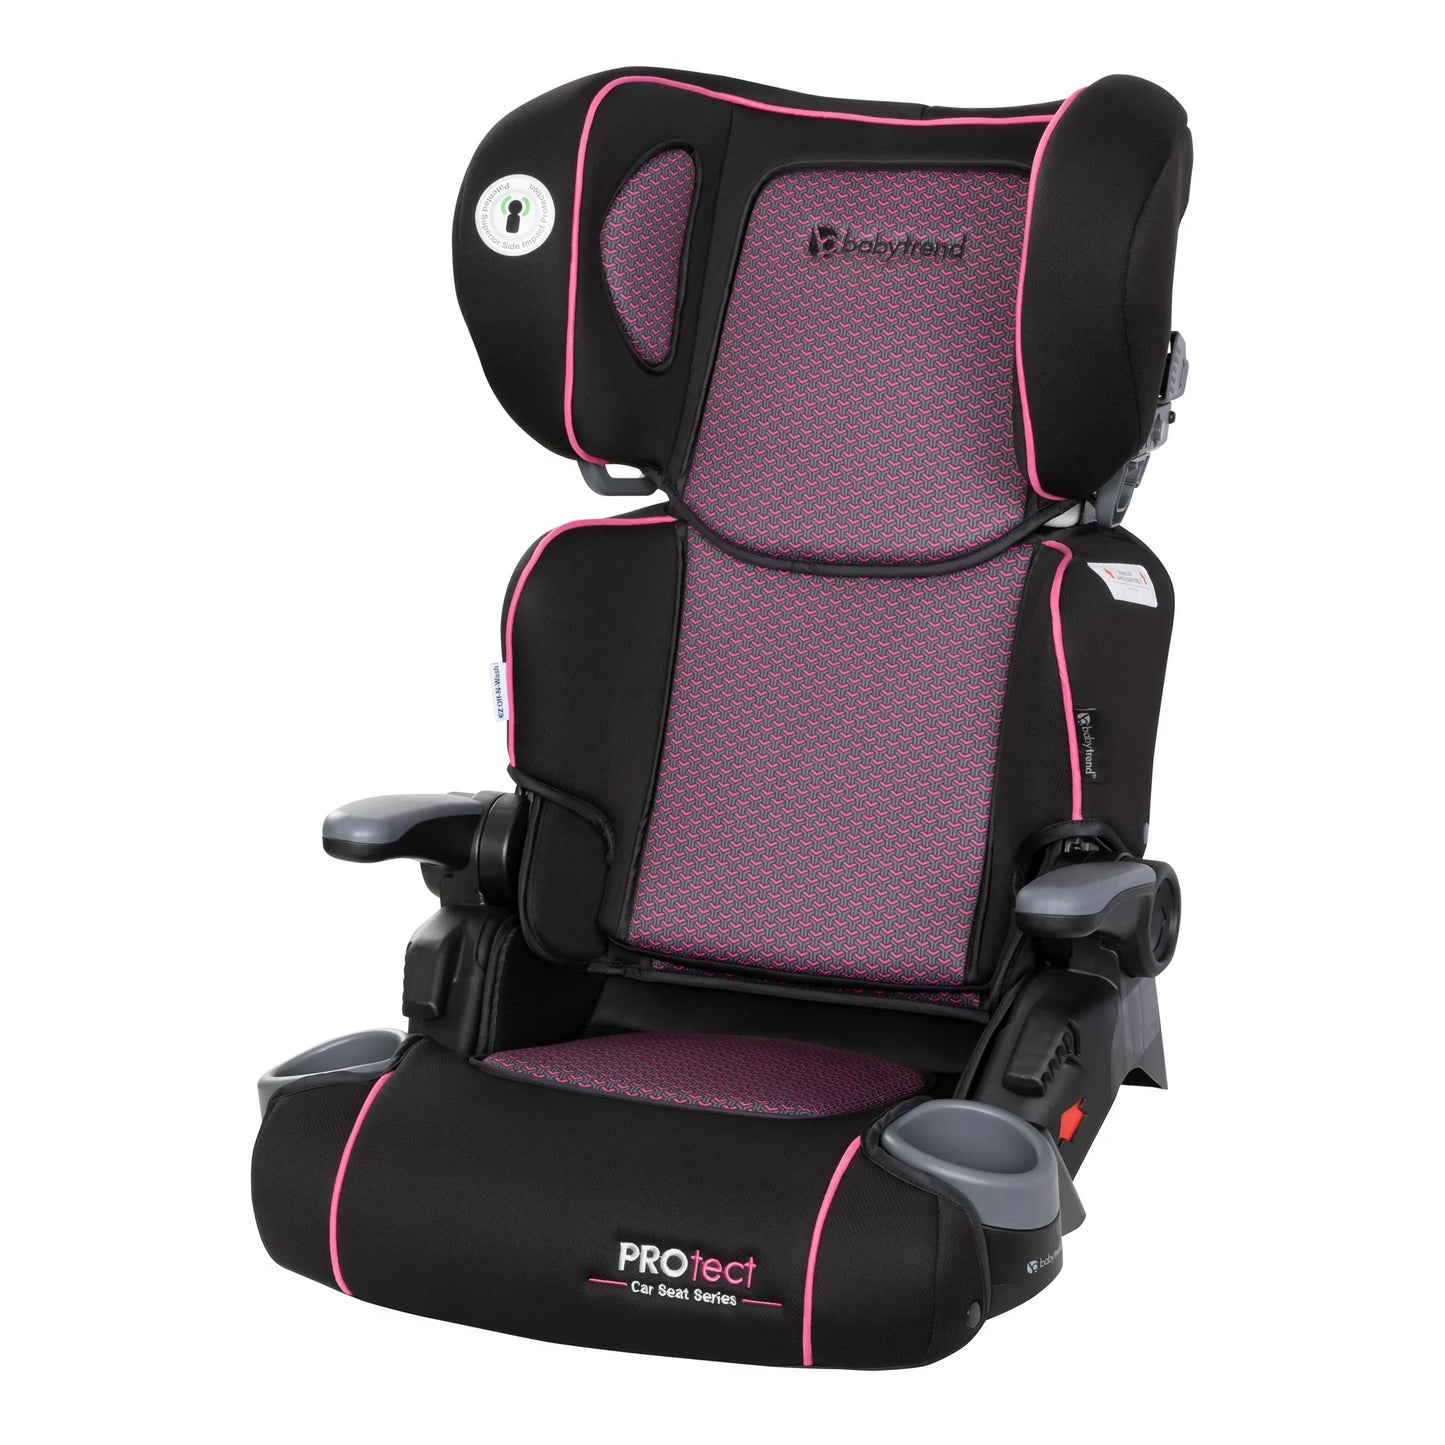 New BabyTrend Protect 2 in 1 Booster Seat (Pink Tech)